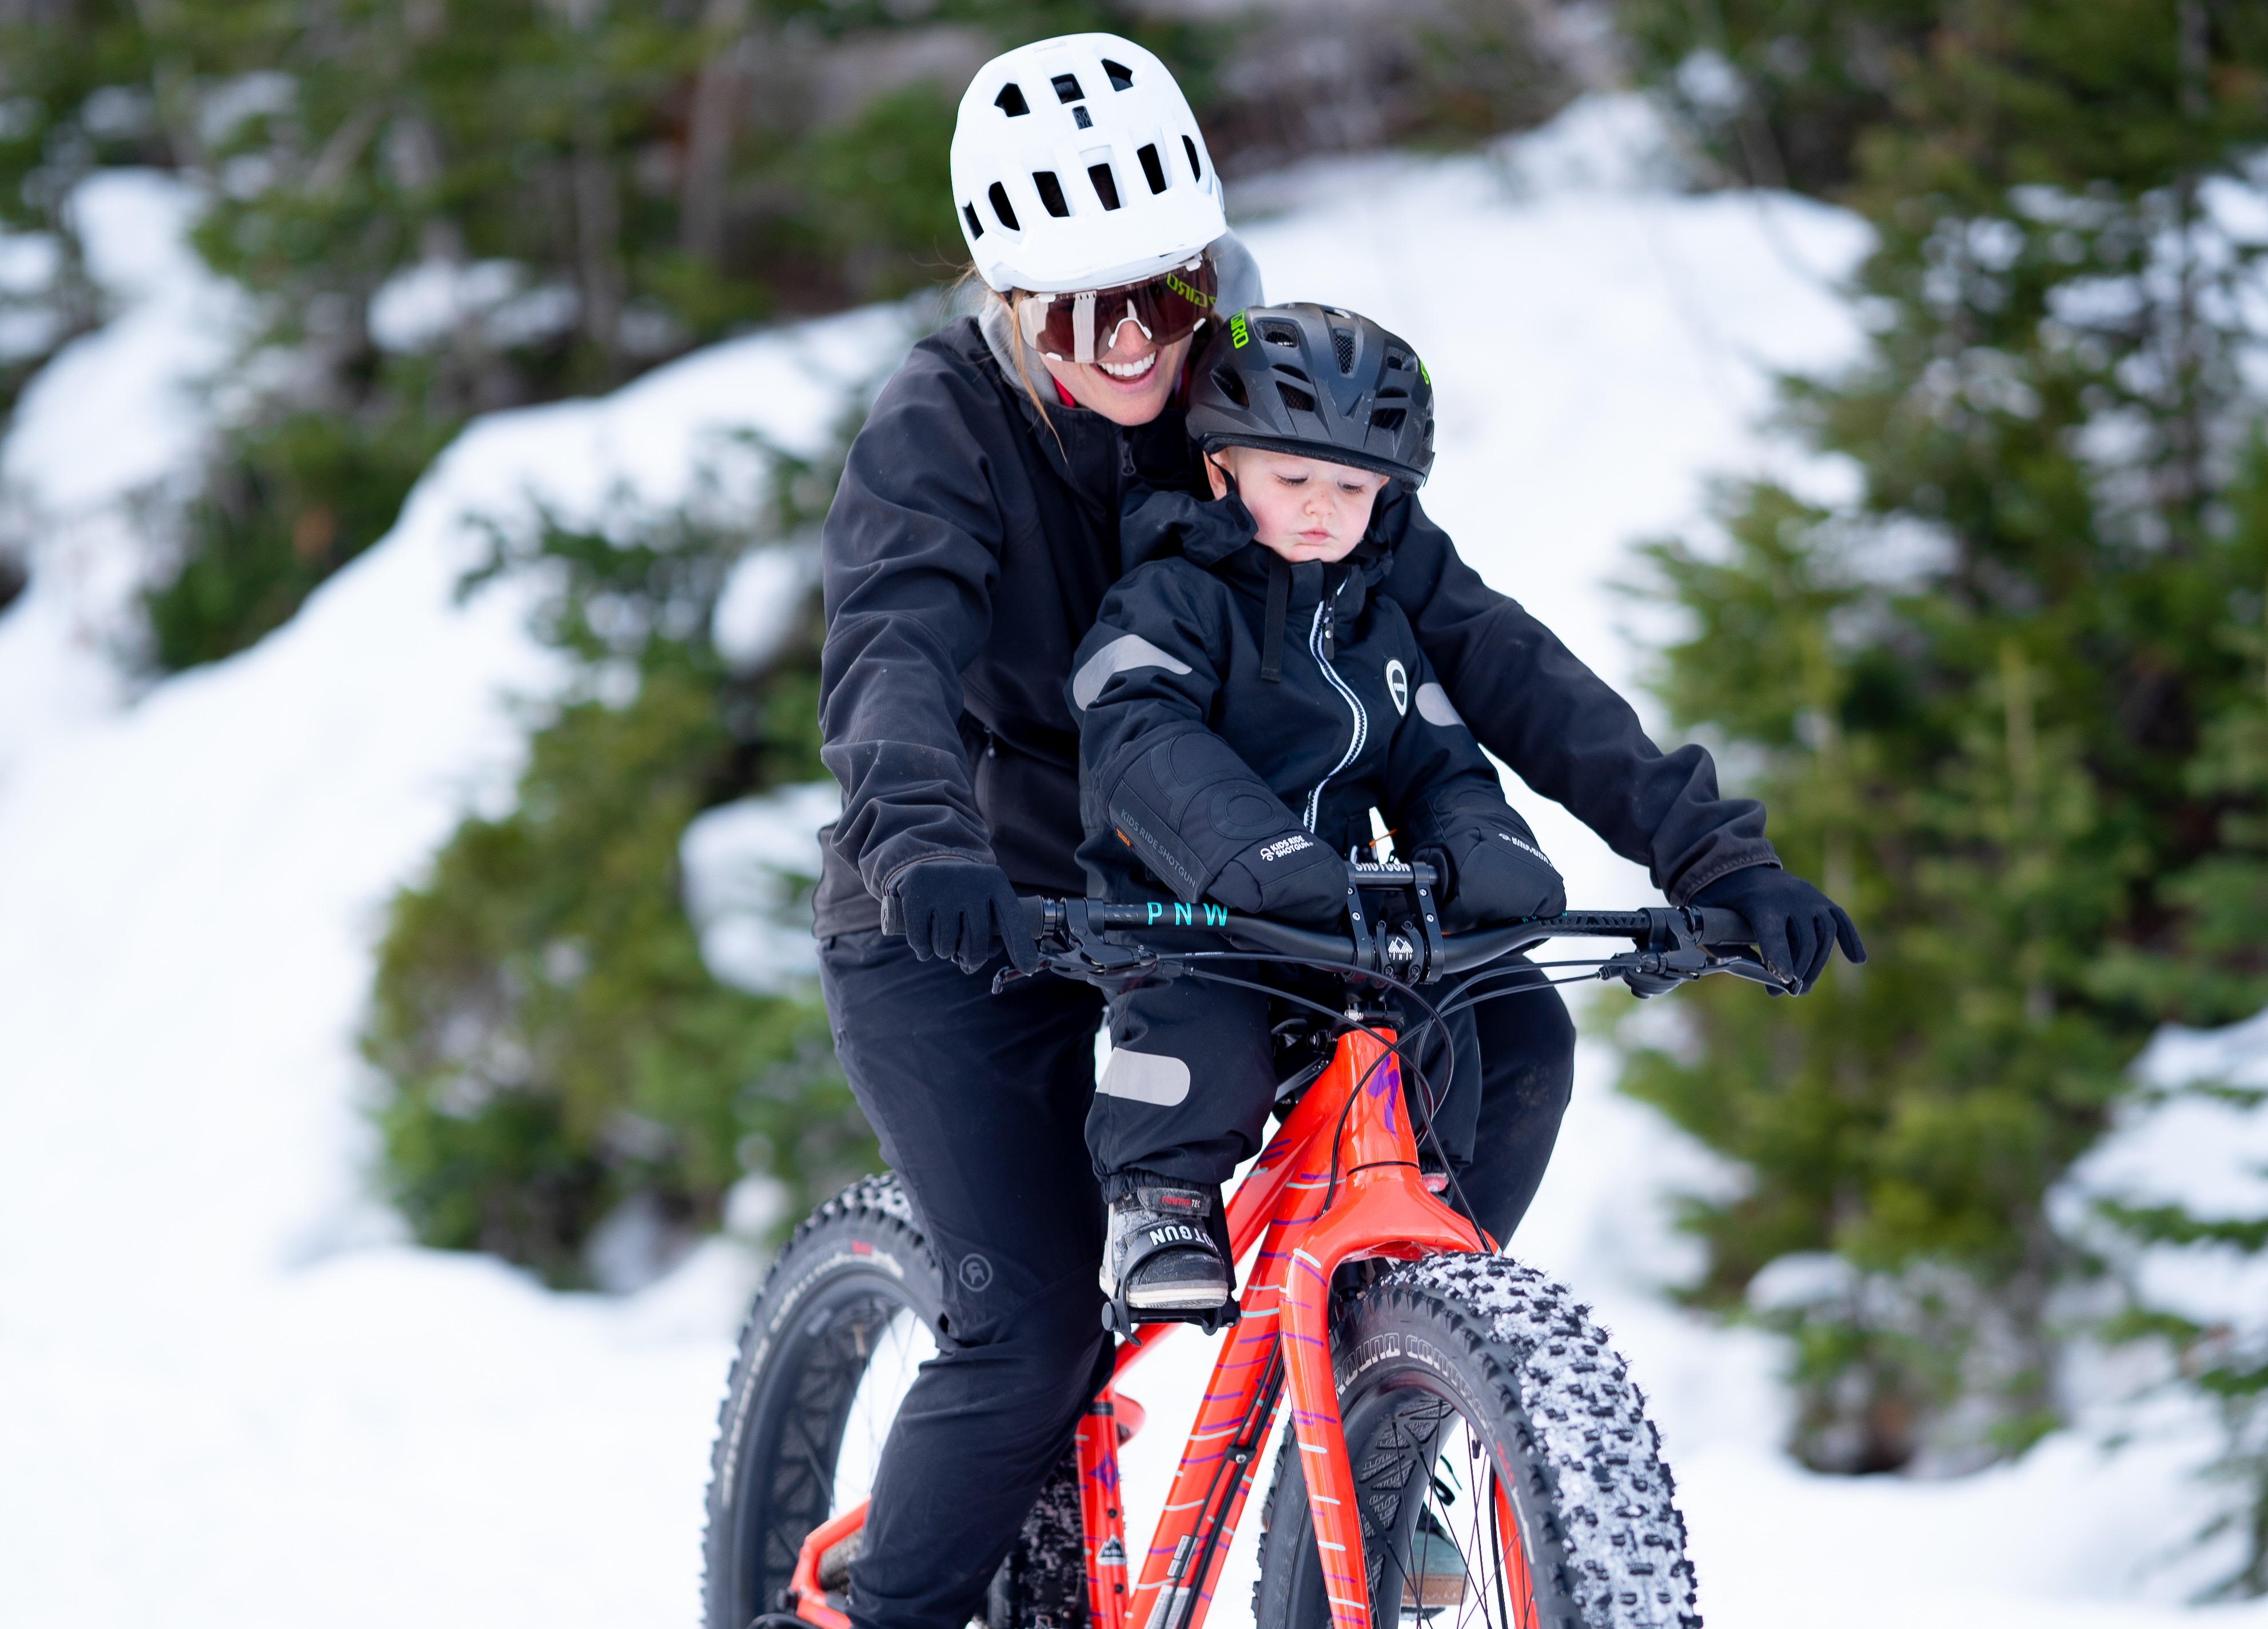 Winter Fat Biking with a 2 year old